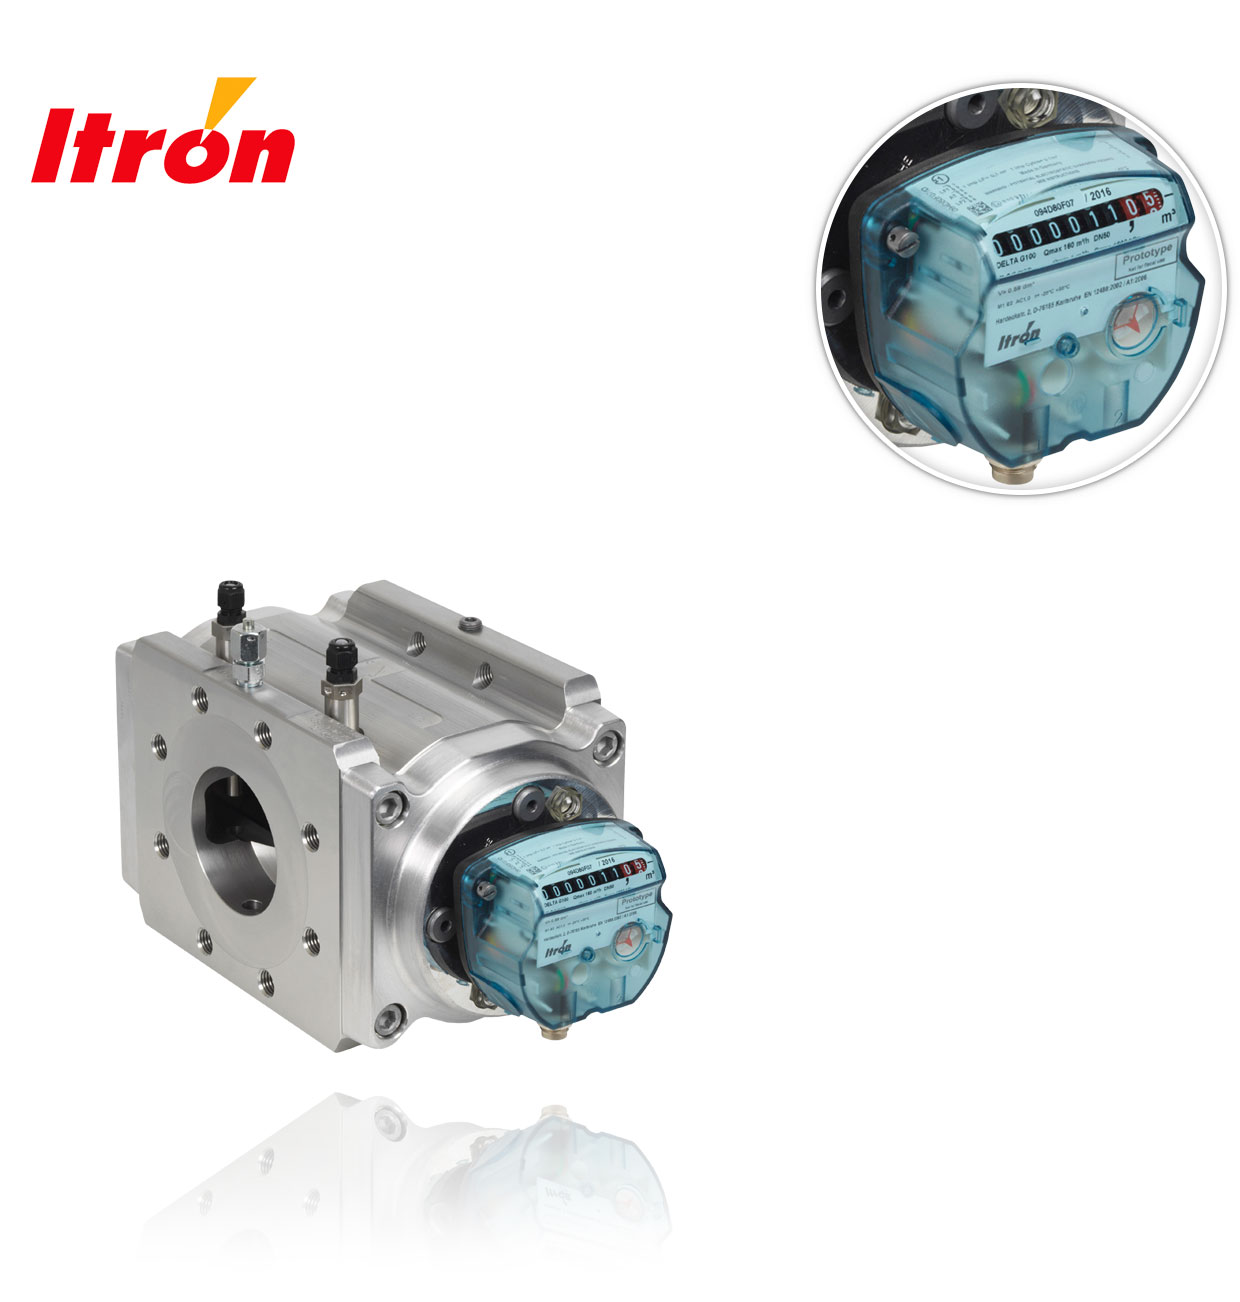 DELTA G250 DN100 maximum qty:400 DYNAMIC:160 LENGTH:241mm ITRON EXTENDED DYNAMIC ROTARY PISTON METER